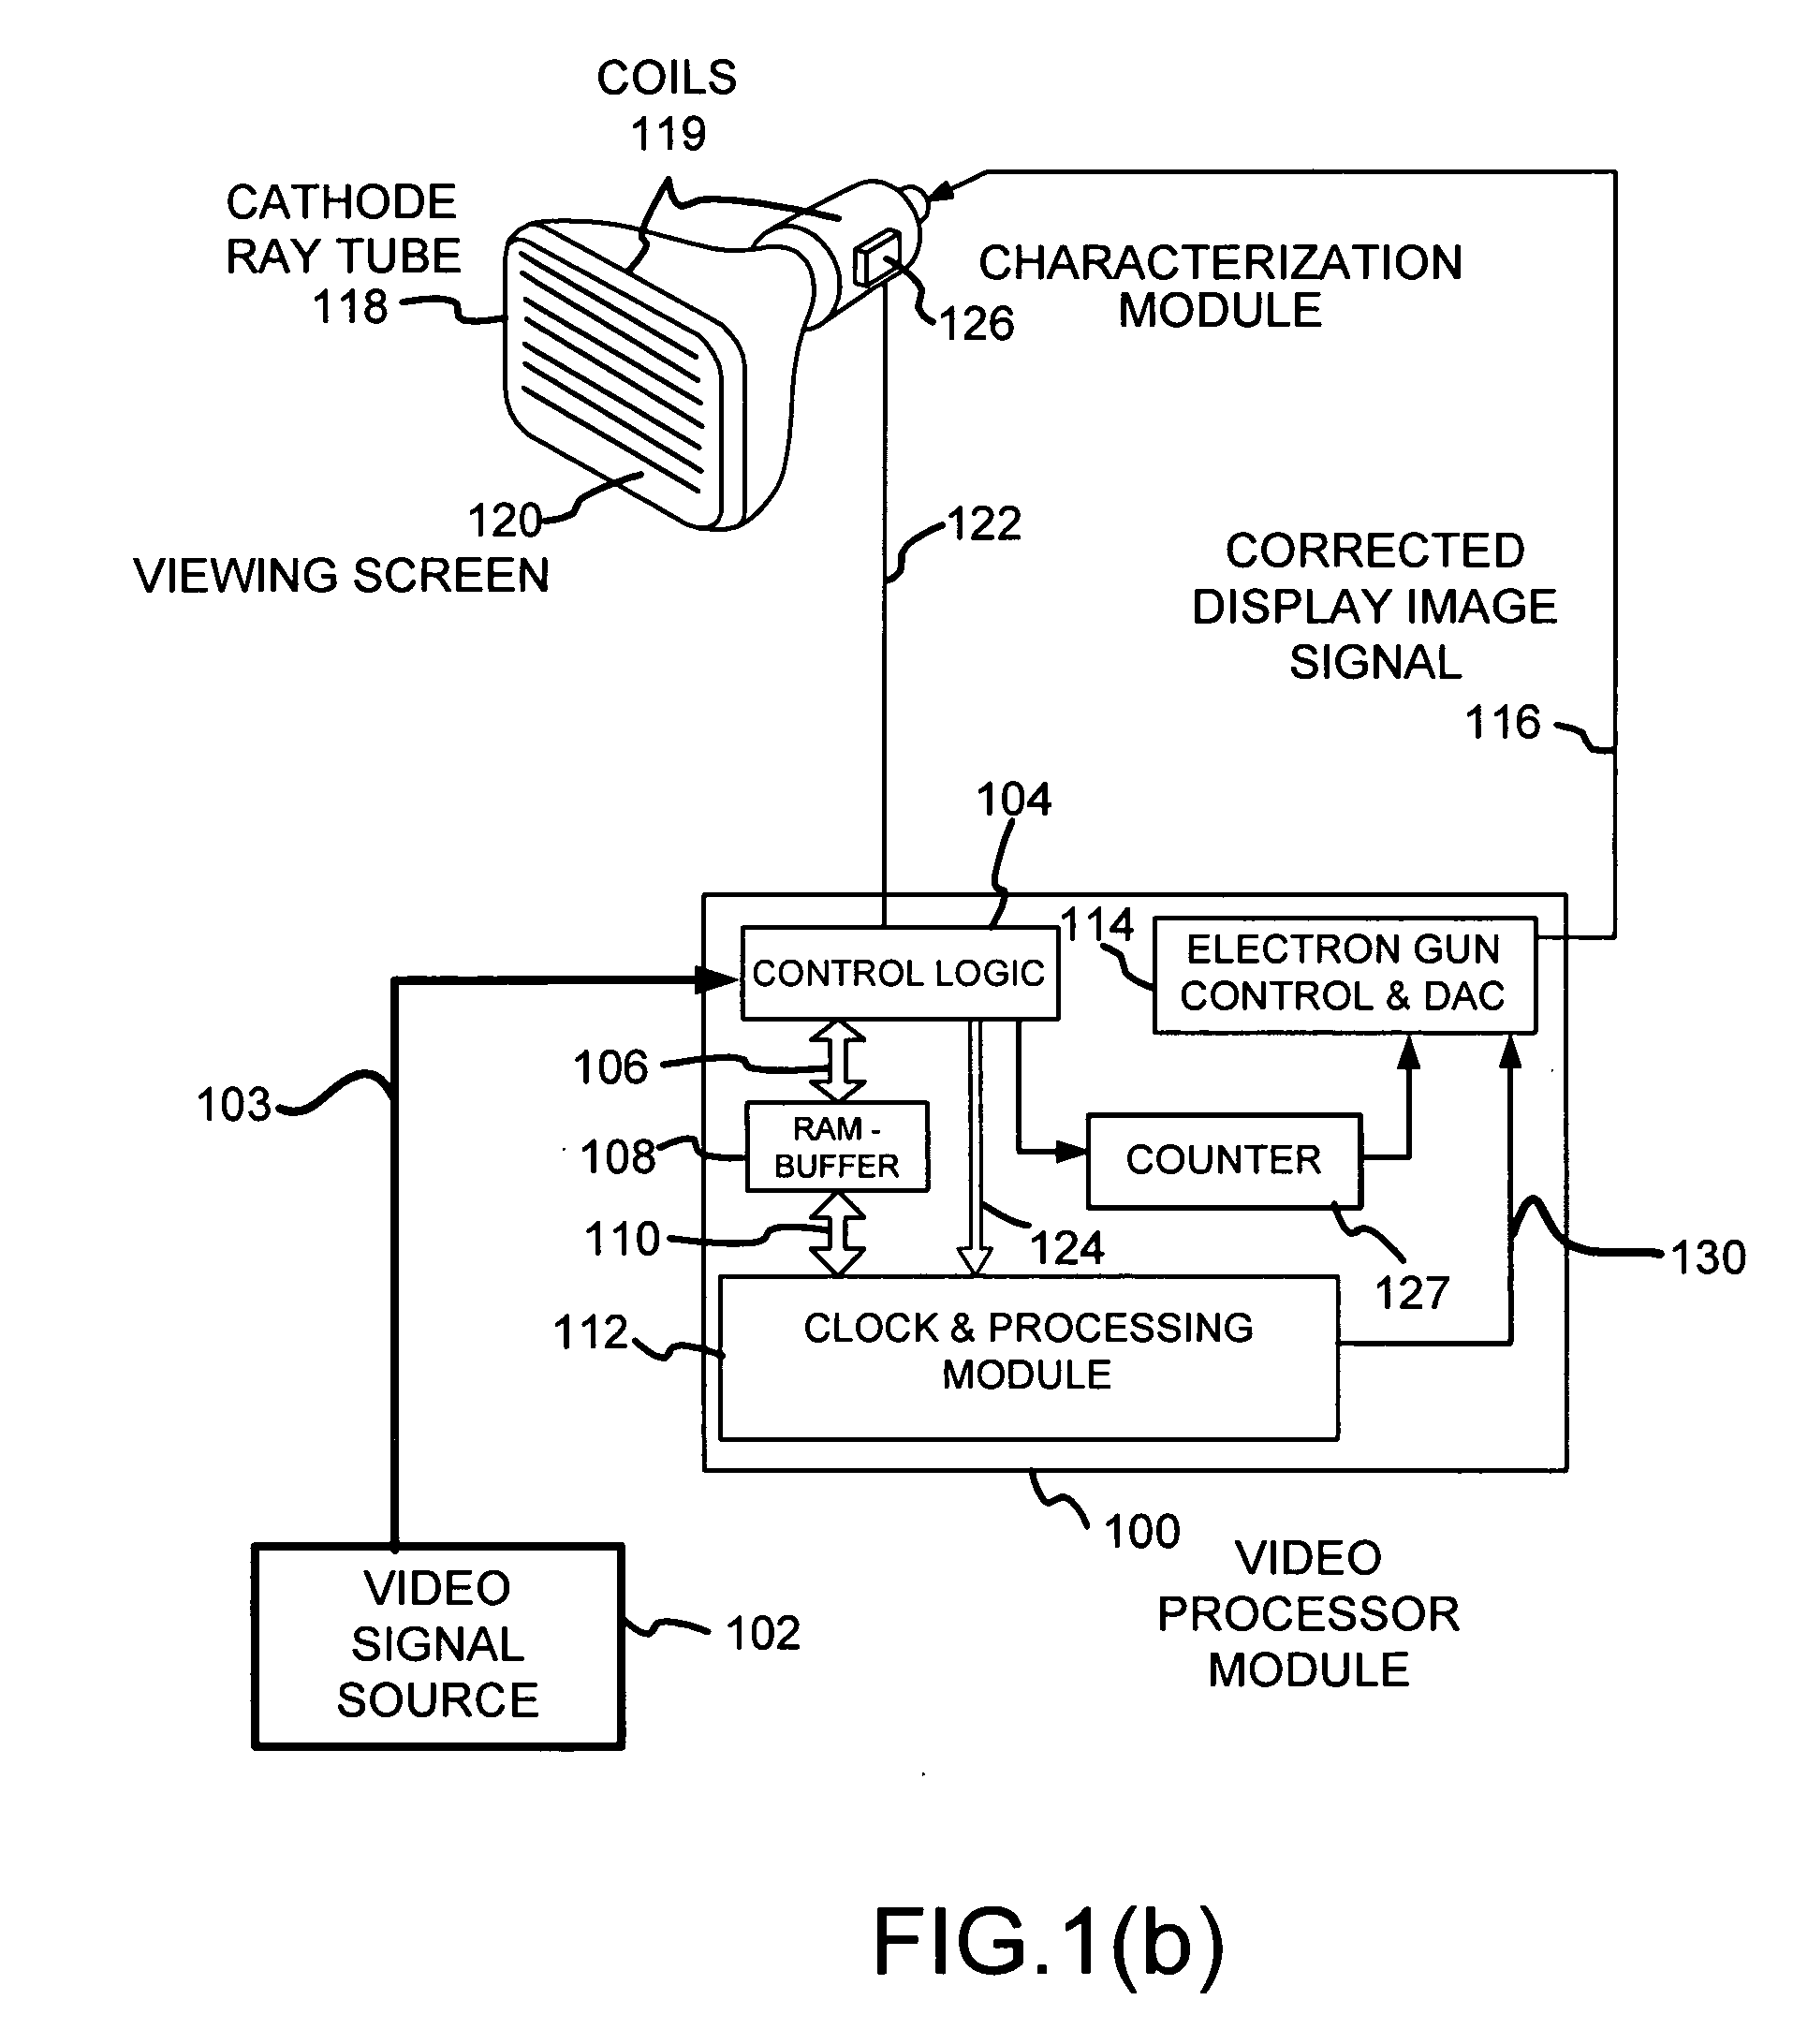 Method and apparatus for correcting errors in displays